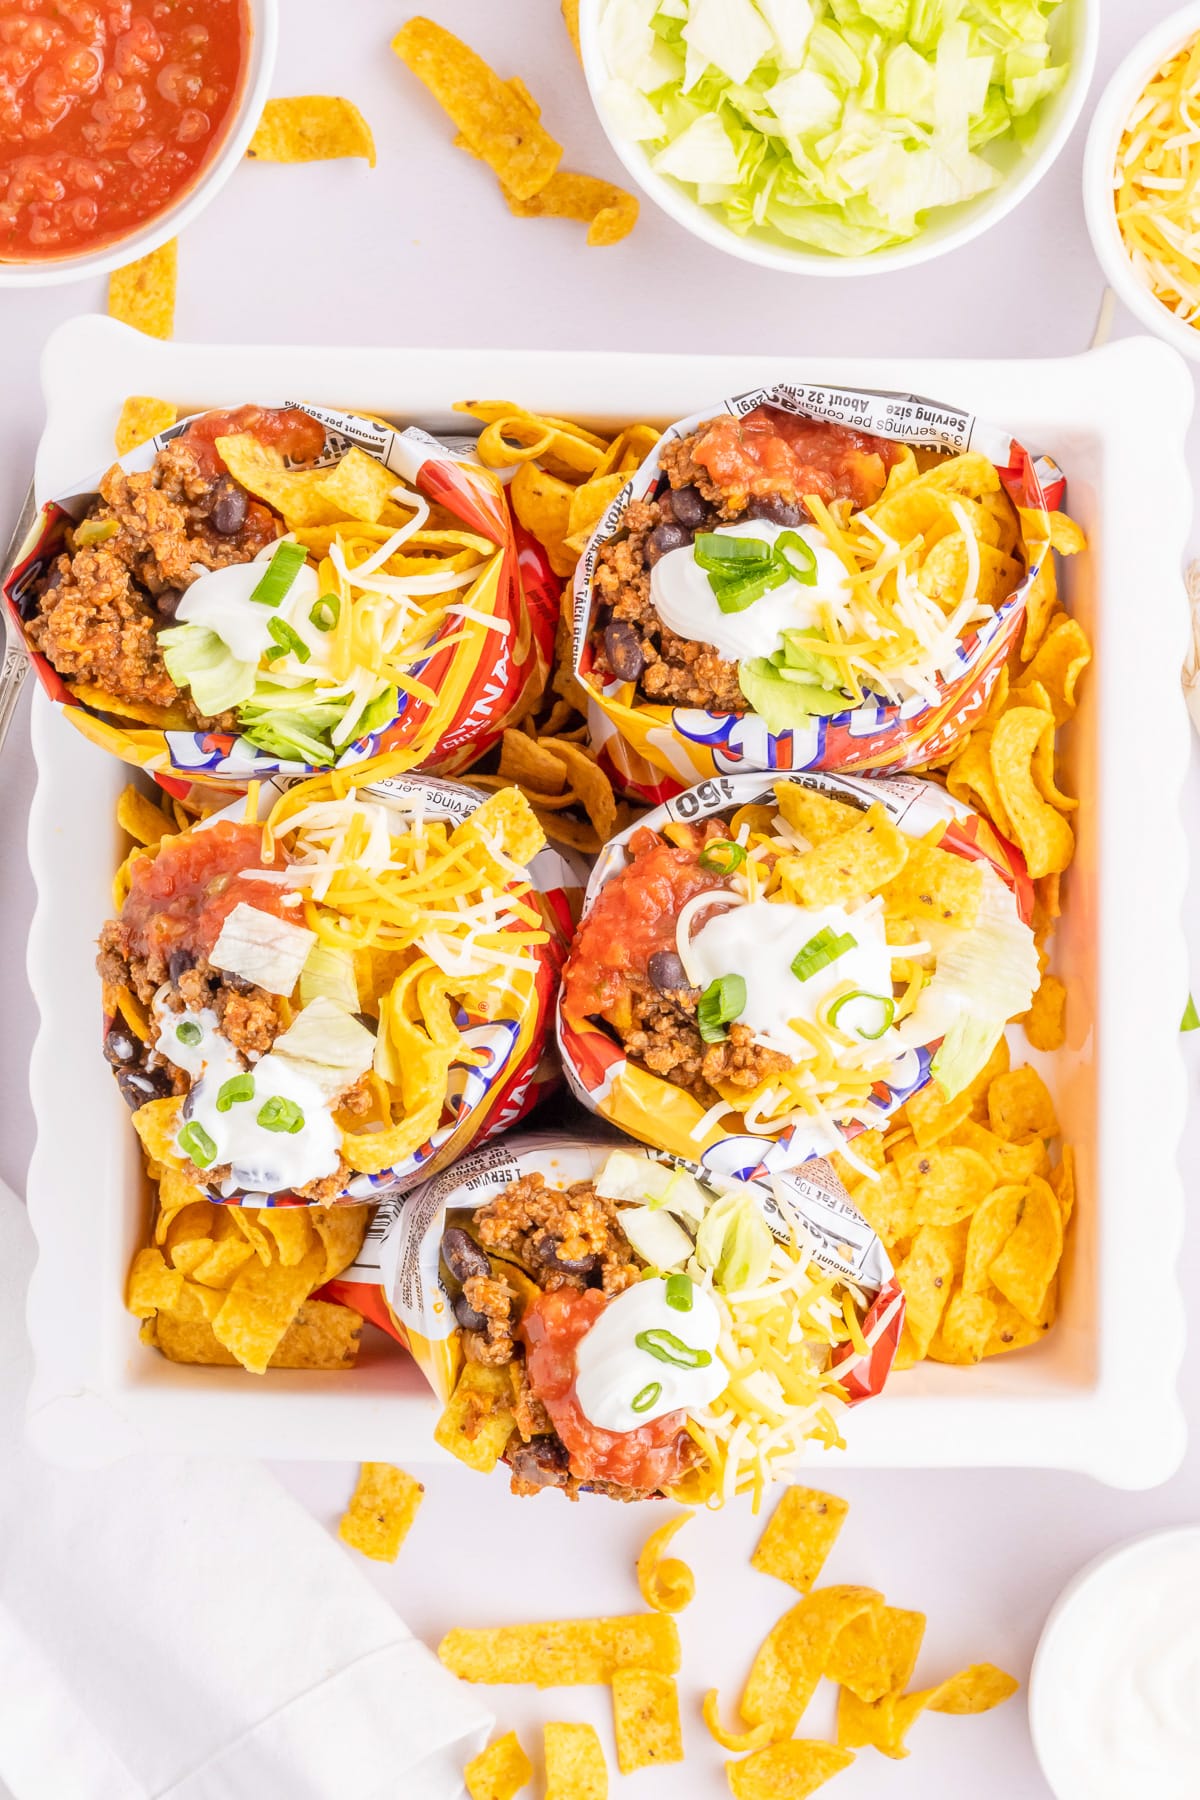 Overhead view of five bags of Frito corn chips all open in a tray from overhead full of taco toppings.